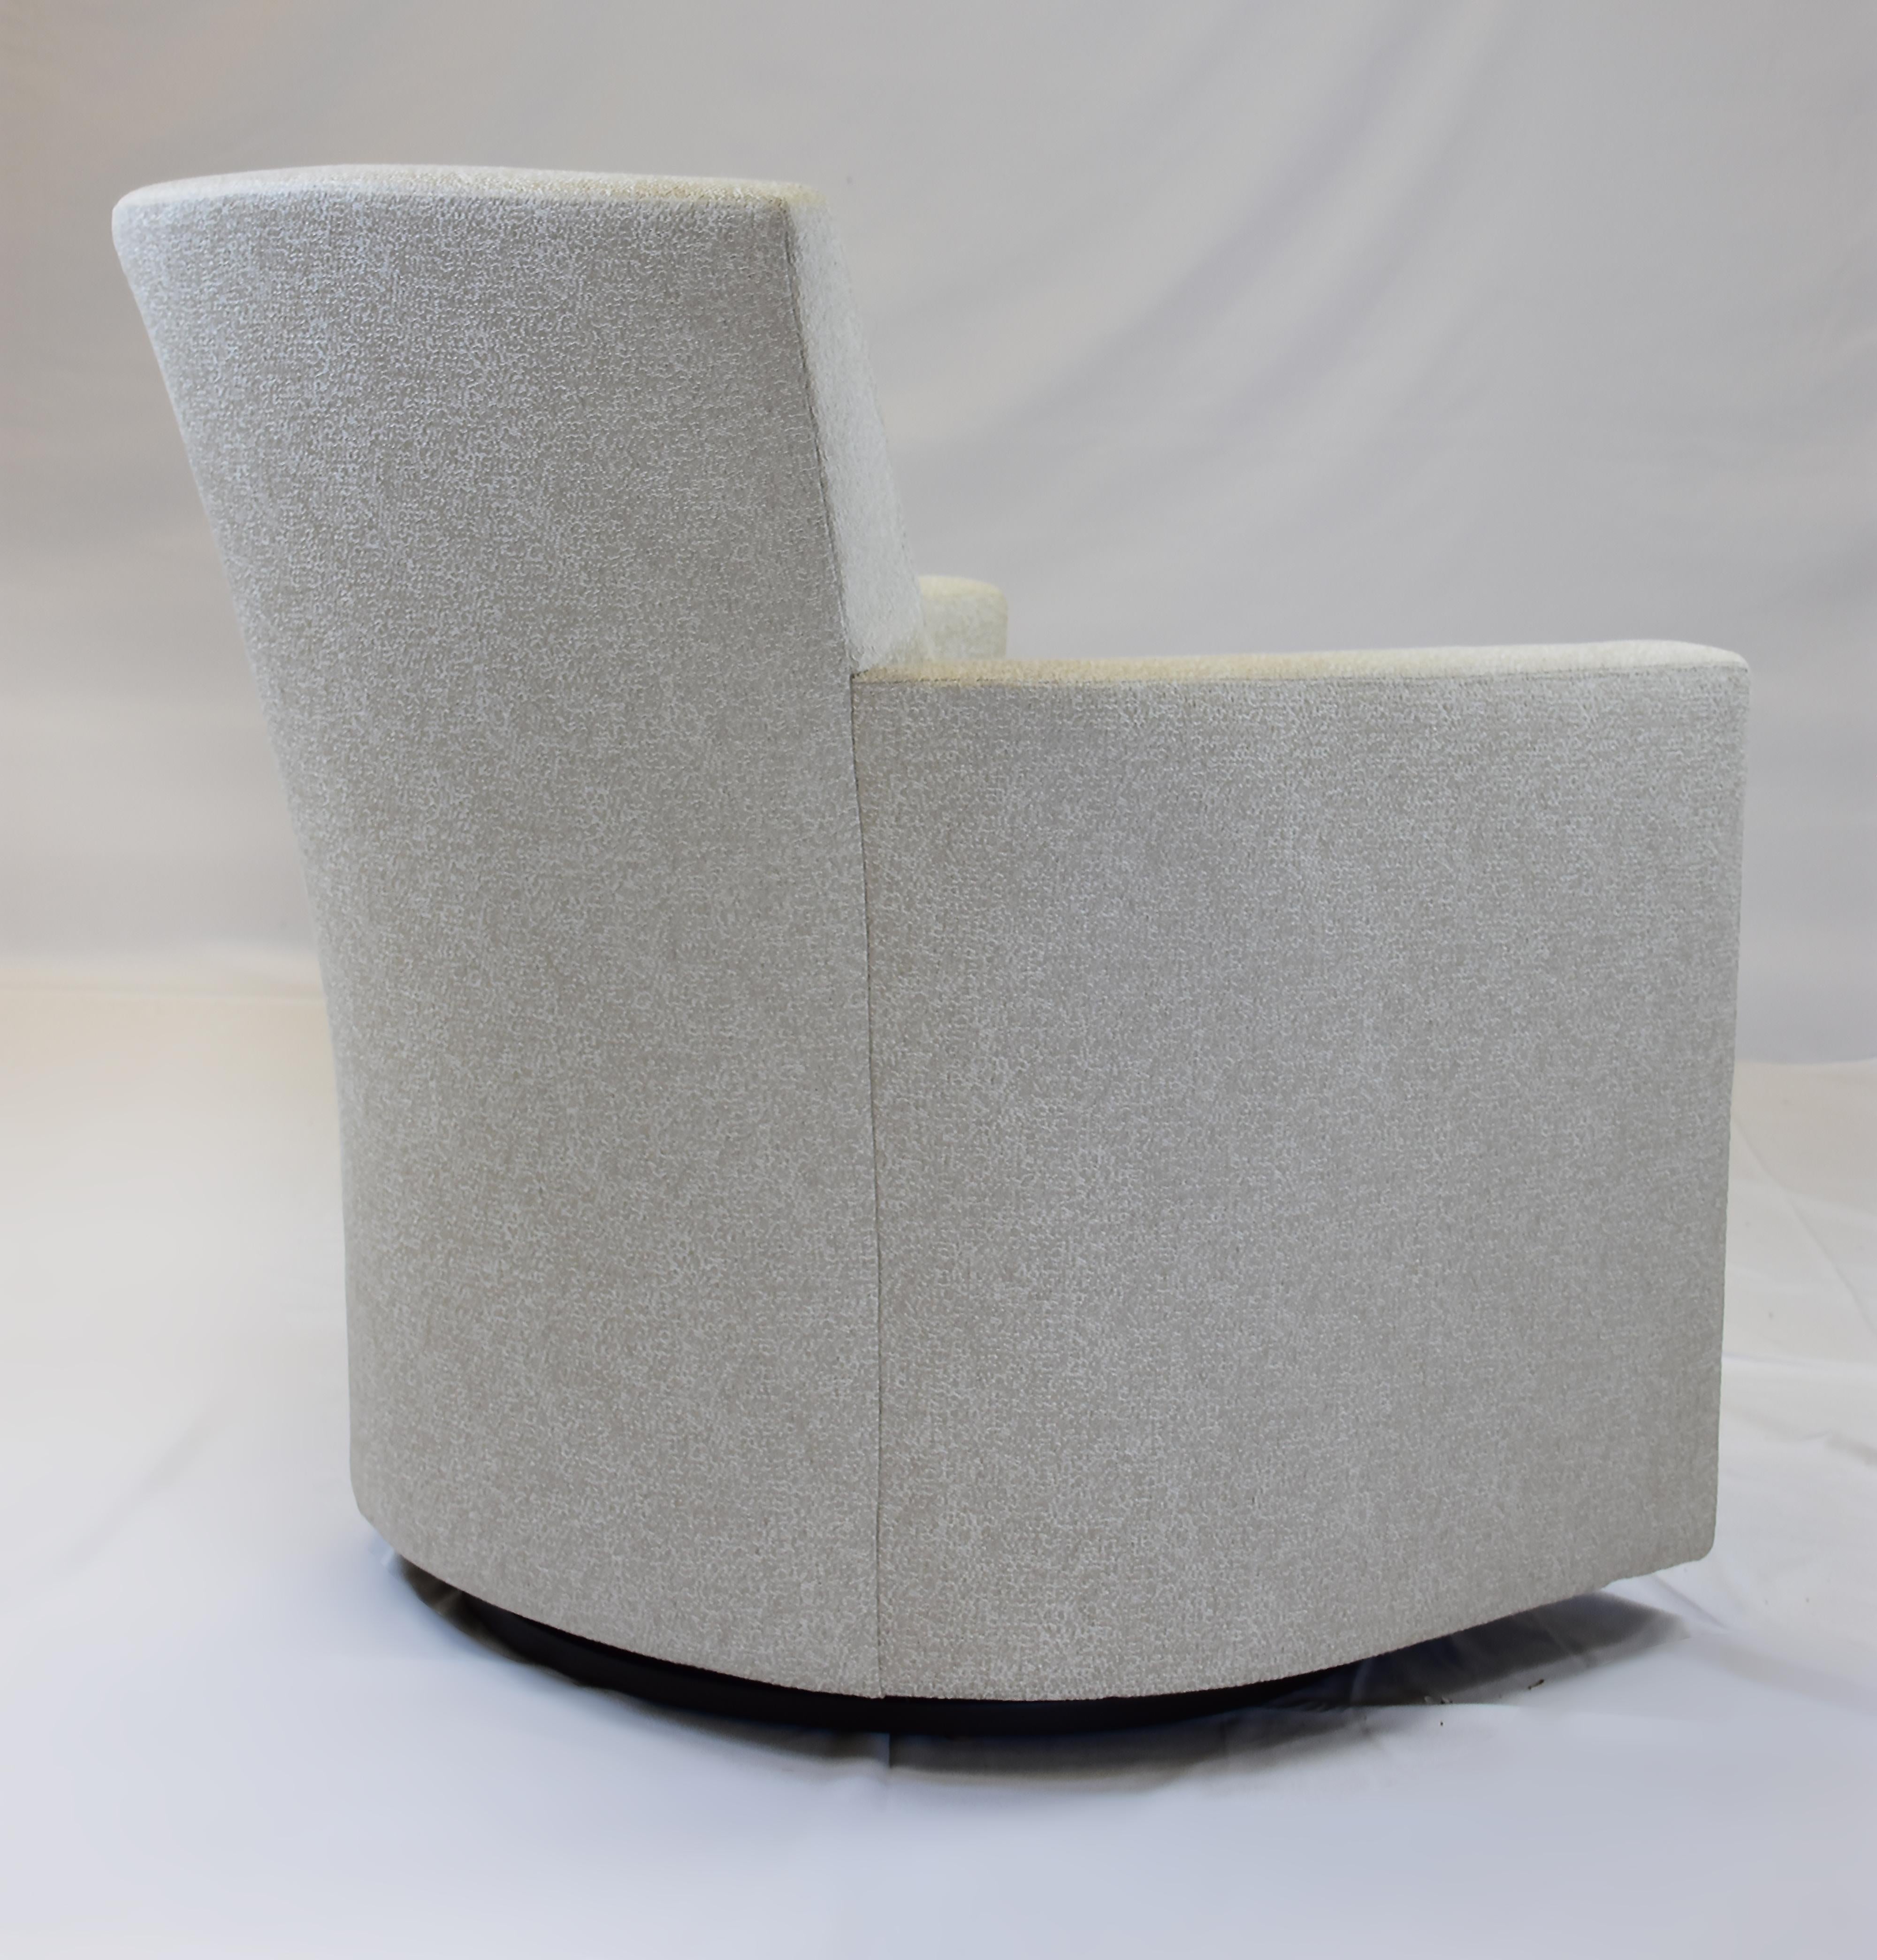 Contemporary Le Jeune Upholstery Barrel Swivel Kara Chair Showroom Model, 2 Available For Sale